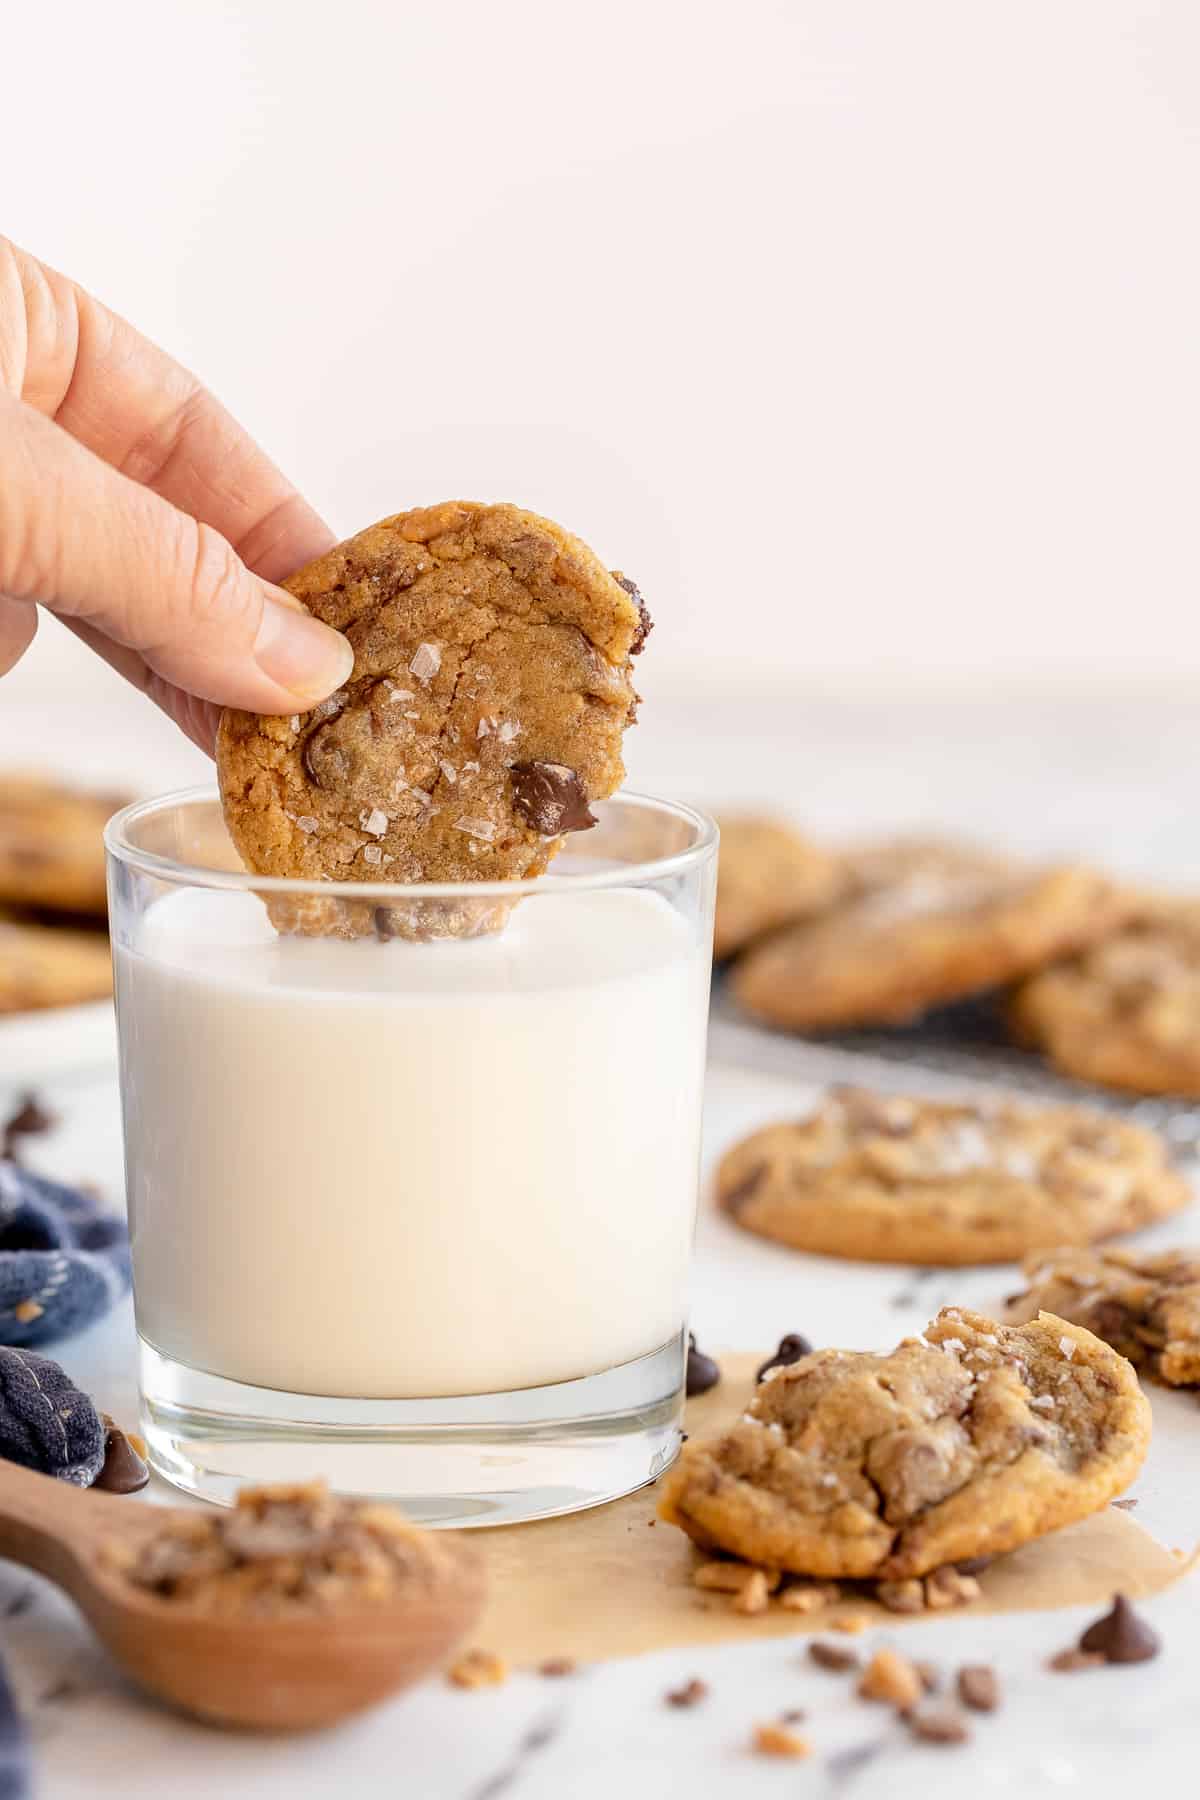 A hand dips a cookie into a glass of milk.